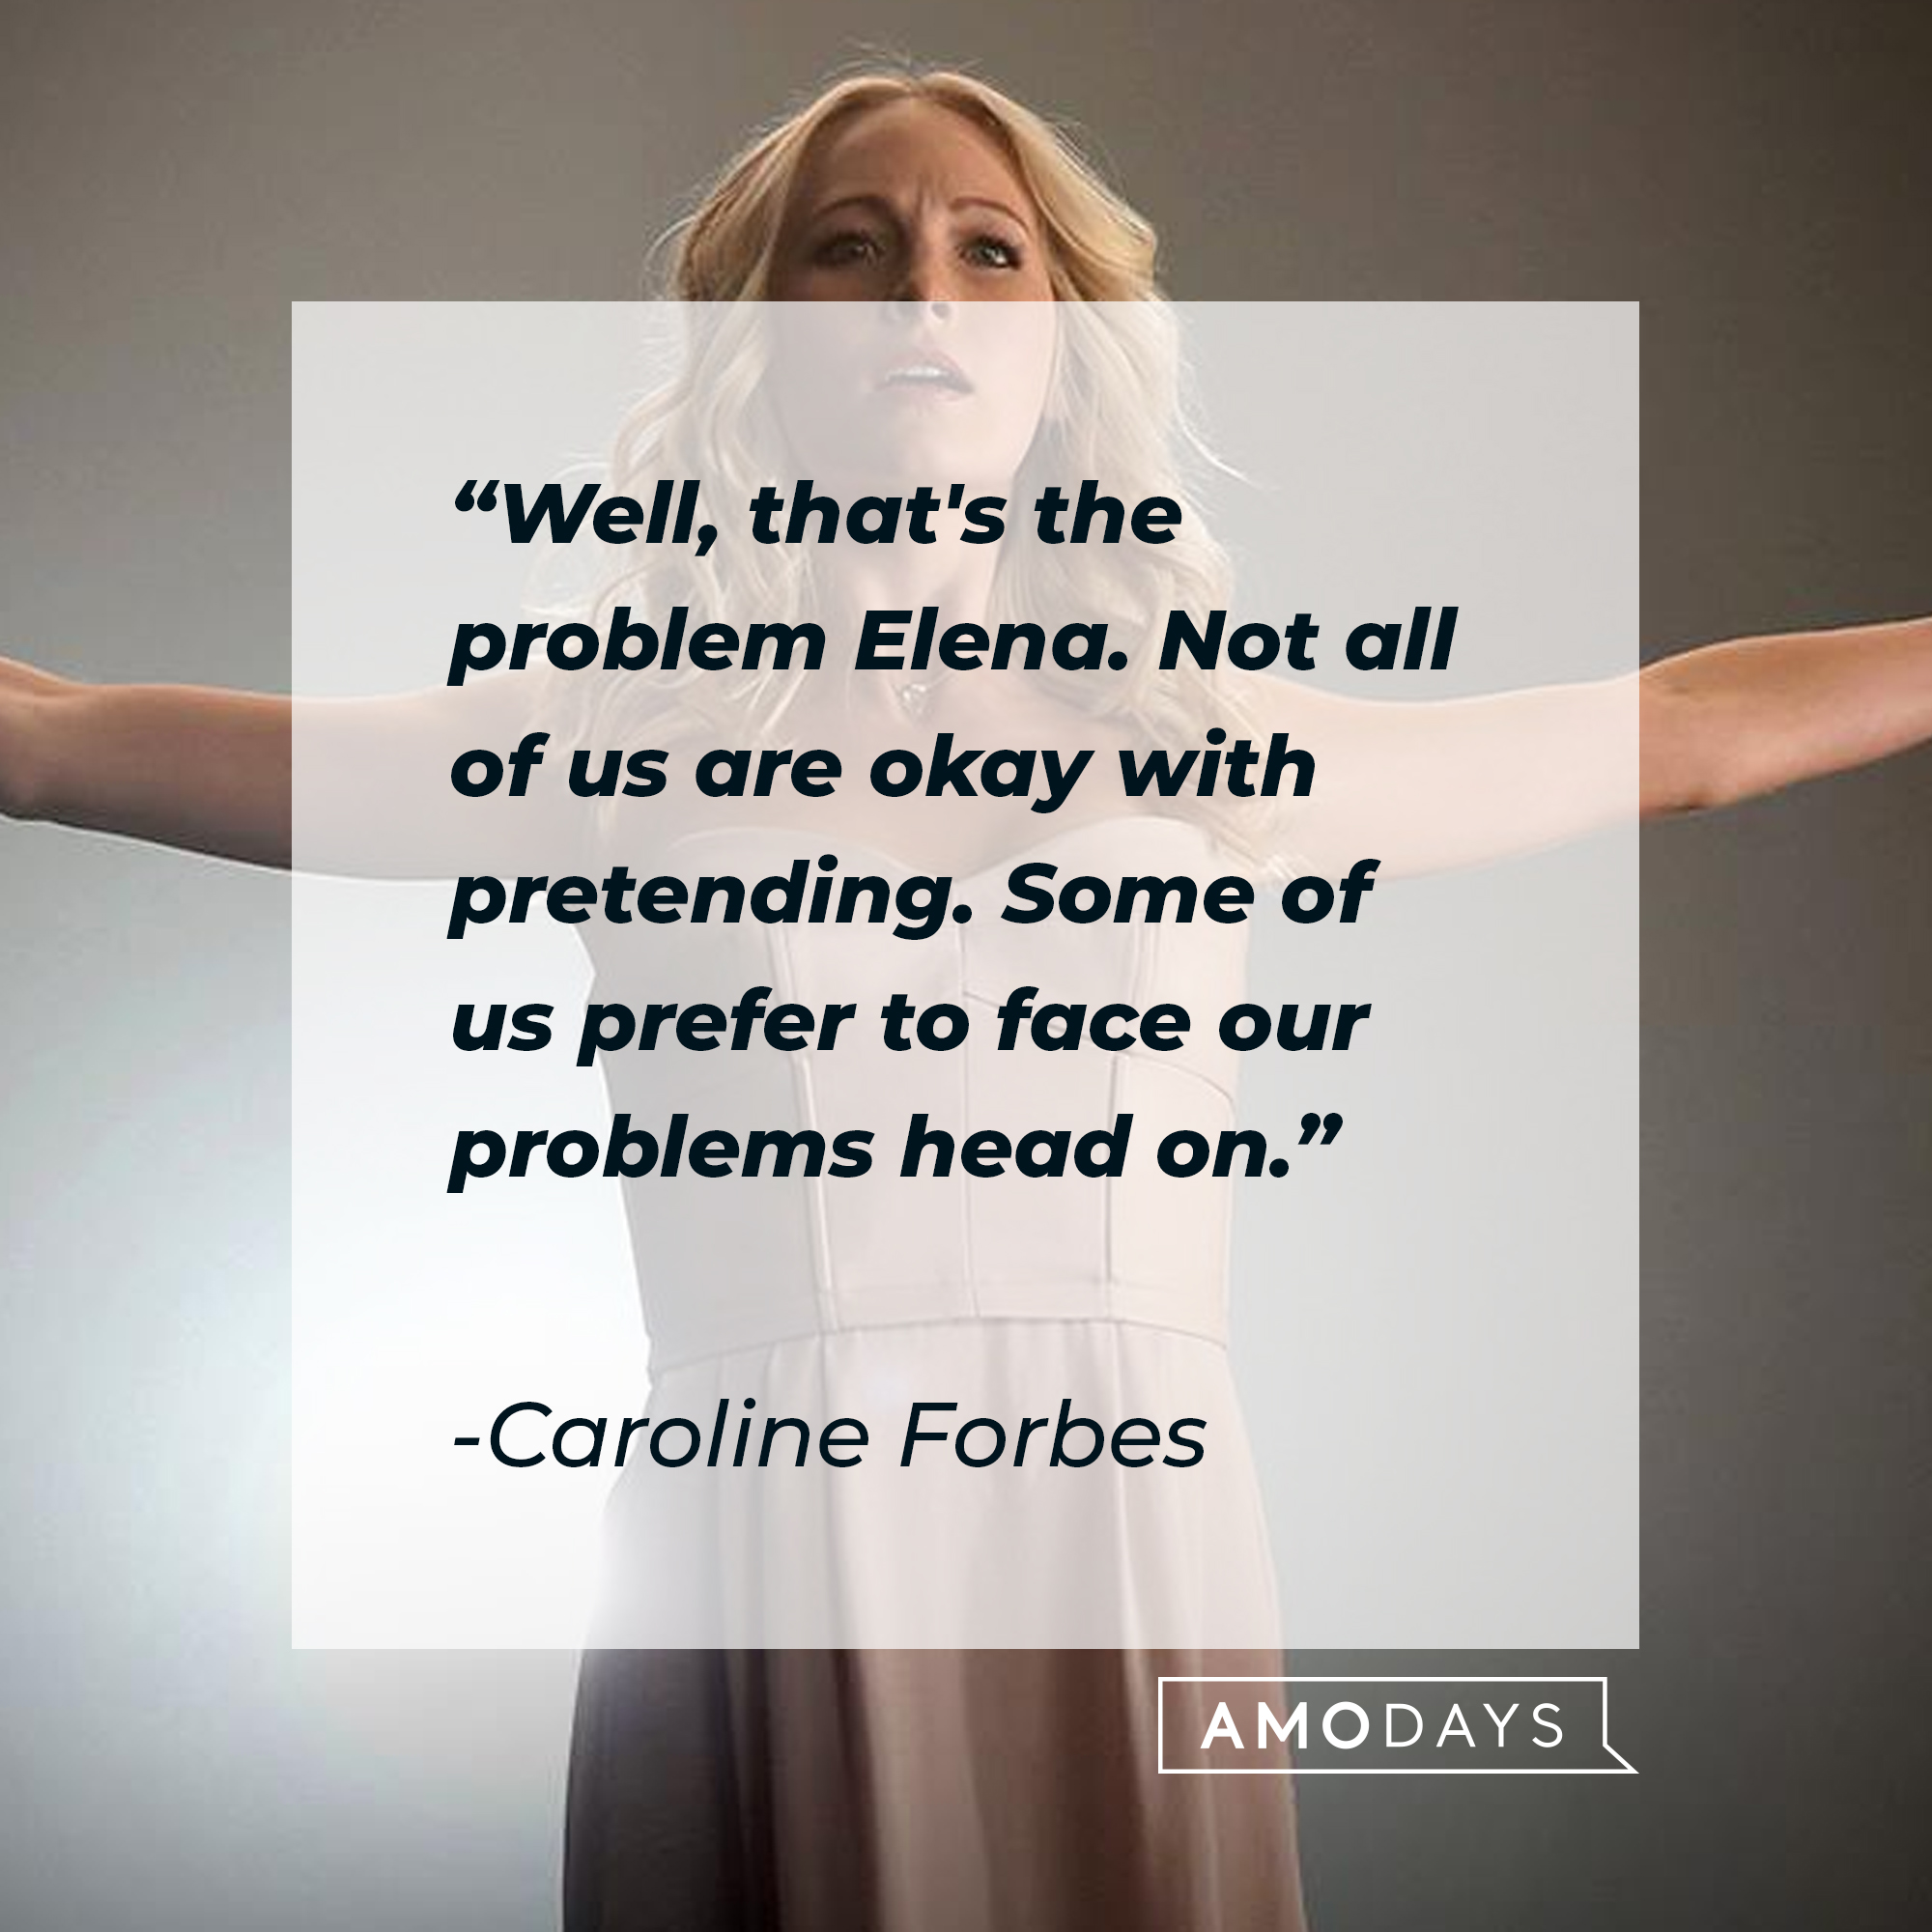 Caroline Forbes' quote: "Well, that's the problem Elena. Not all of us are okay with pretending. Some of us prefer to face our problems head on." | Source: Facebook.com/thevampirediaries